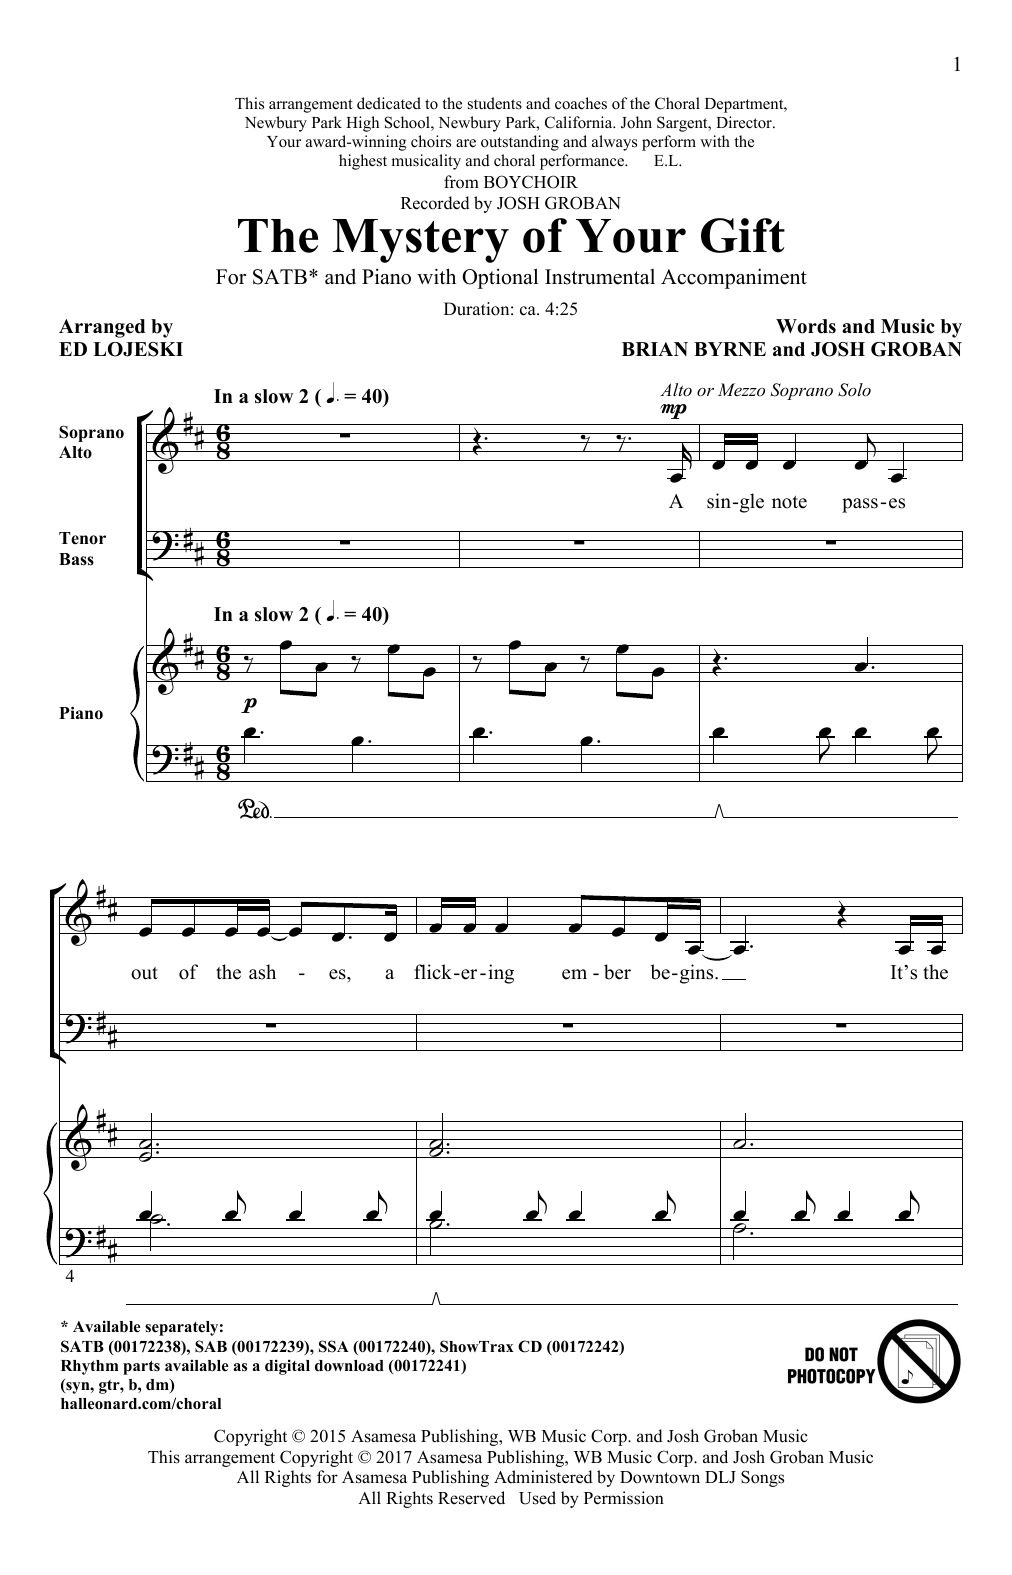 Download Ed Lojeski The Mystery Of Your Gift Sheet Music